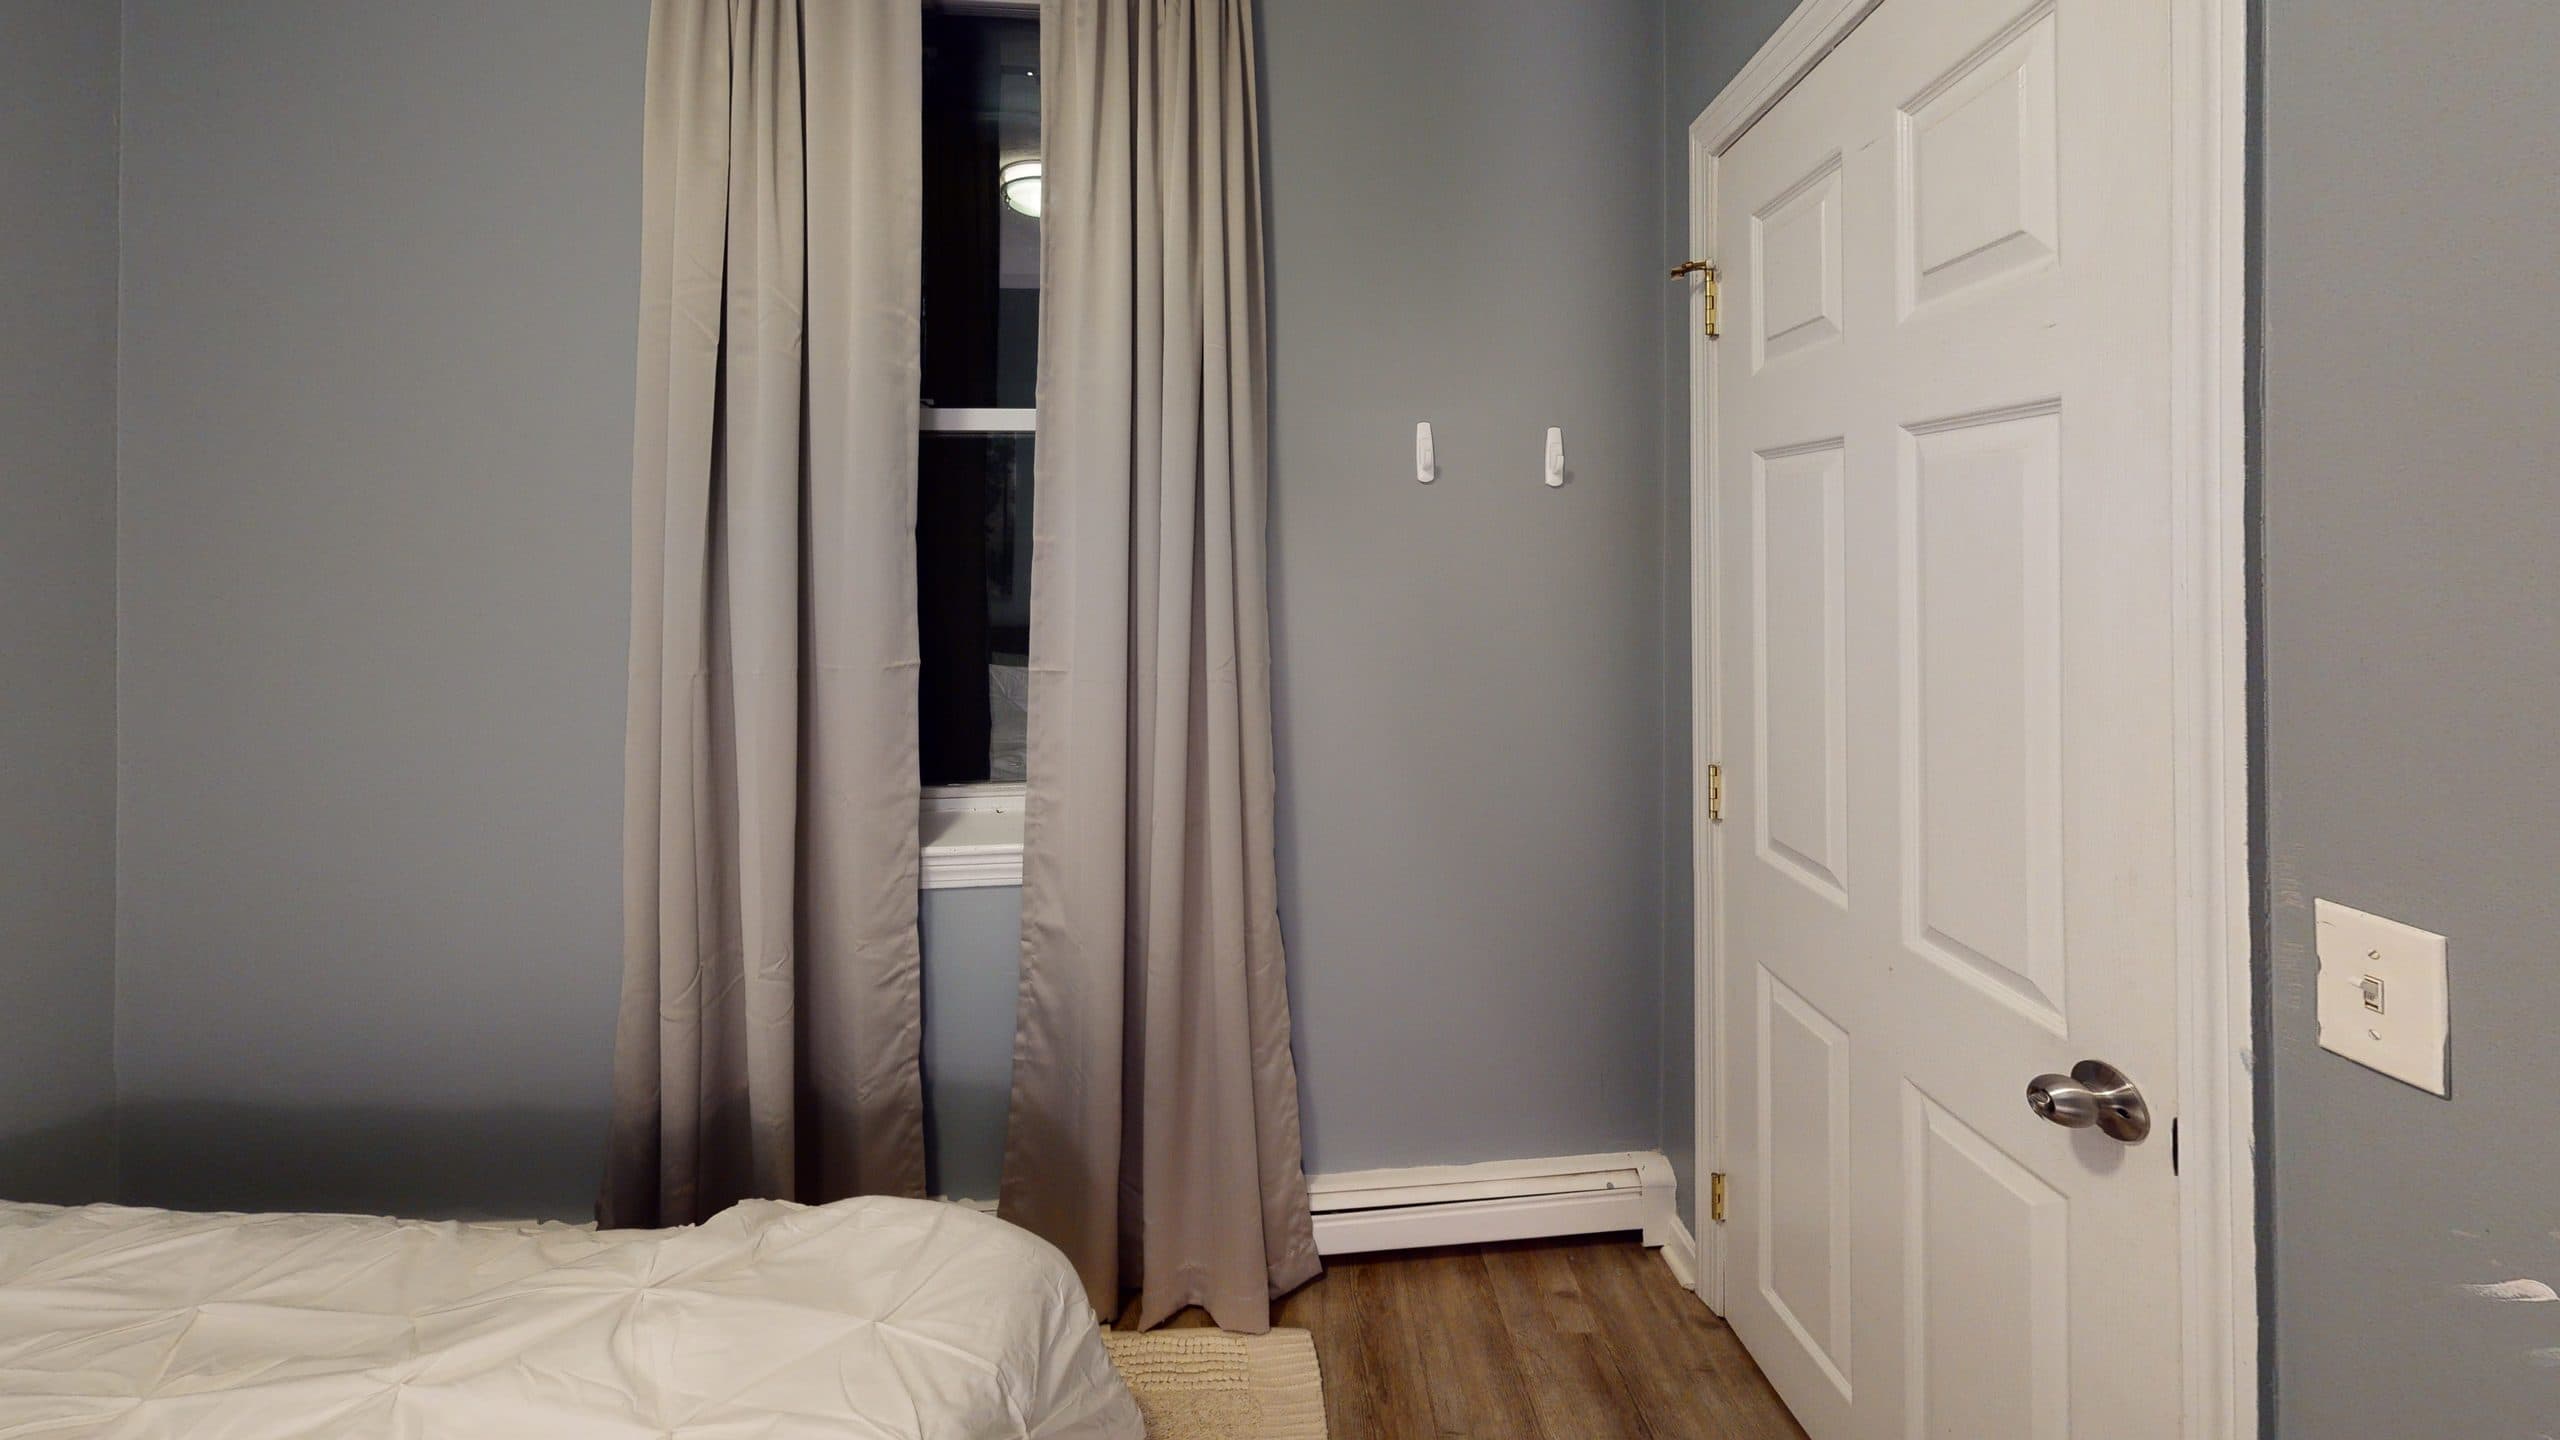 Photo 22 of #1287: Queen Bedroom A at June Homes